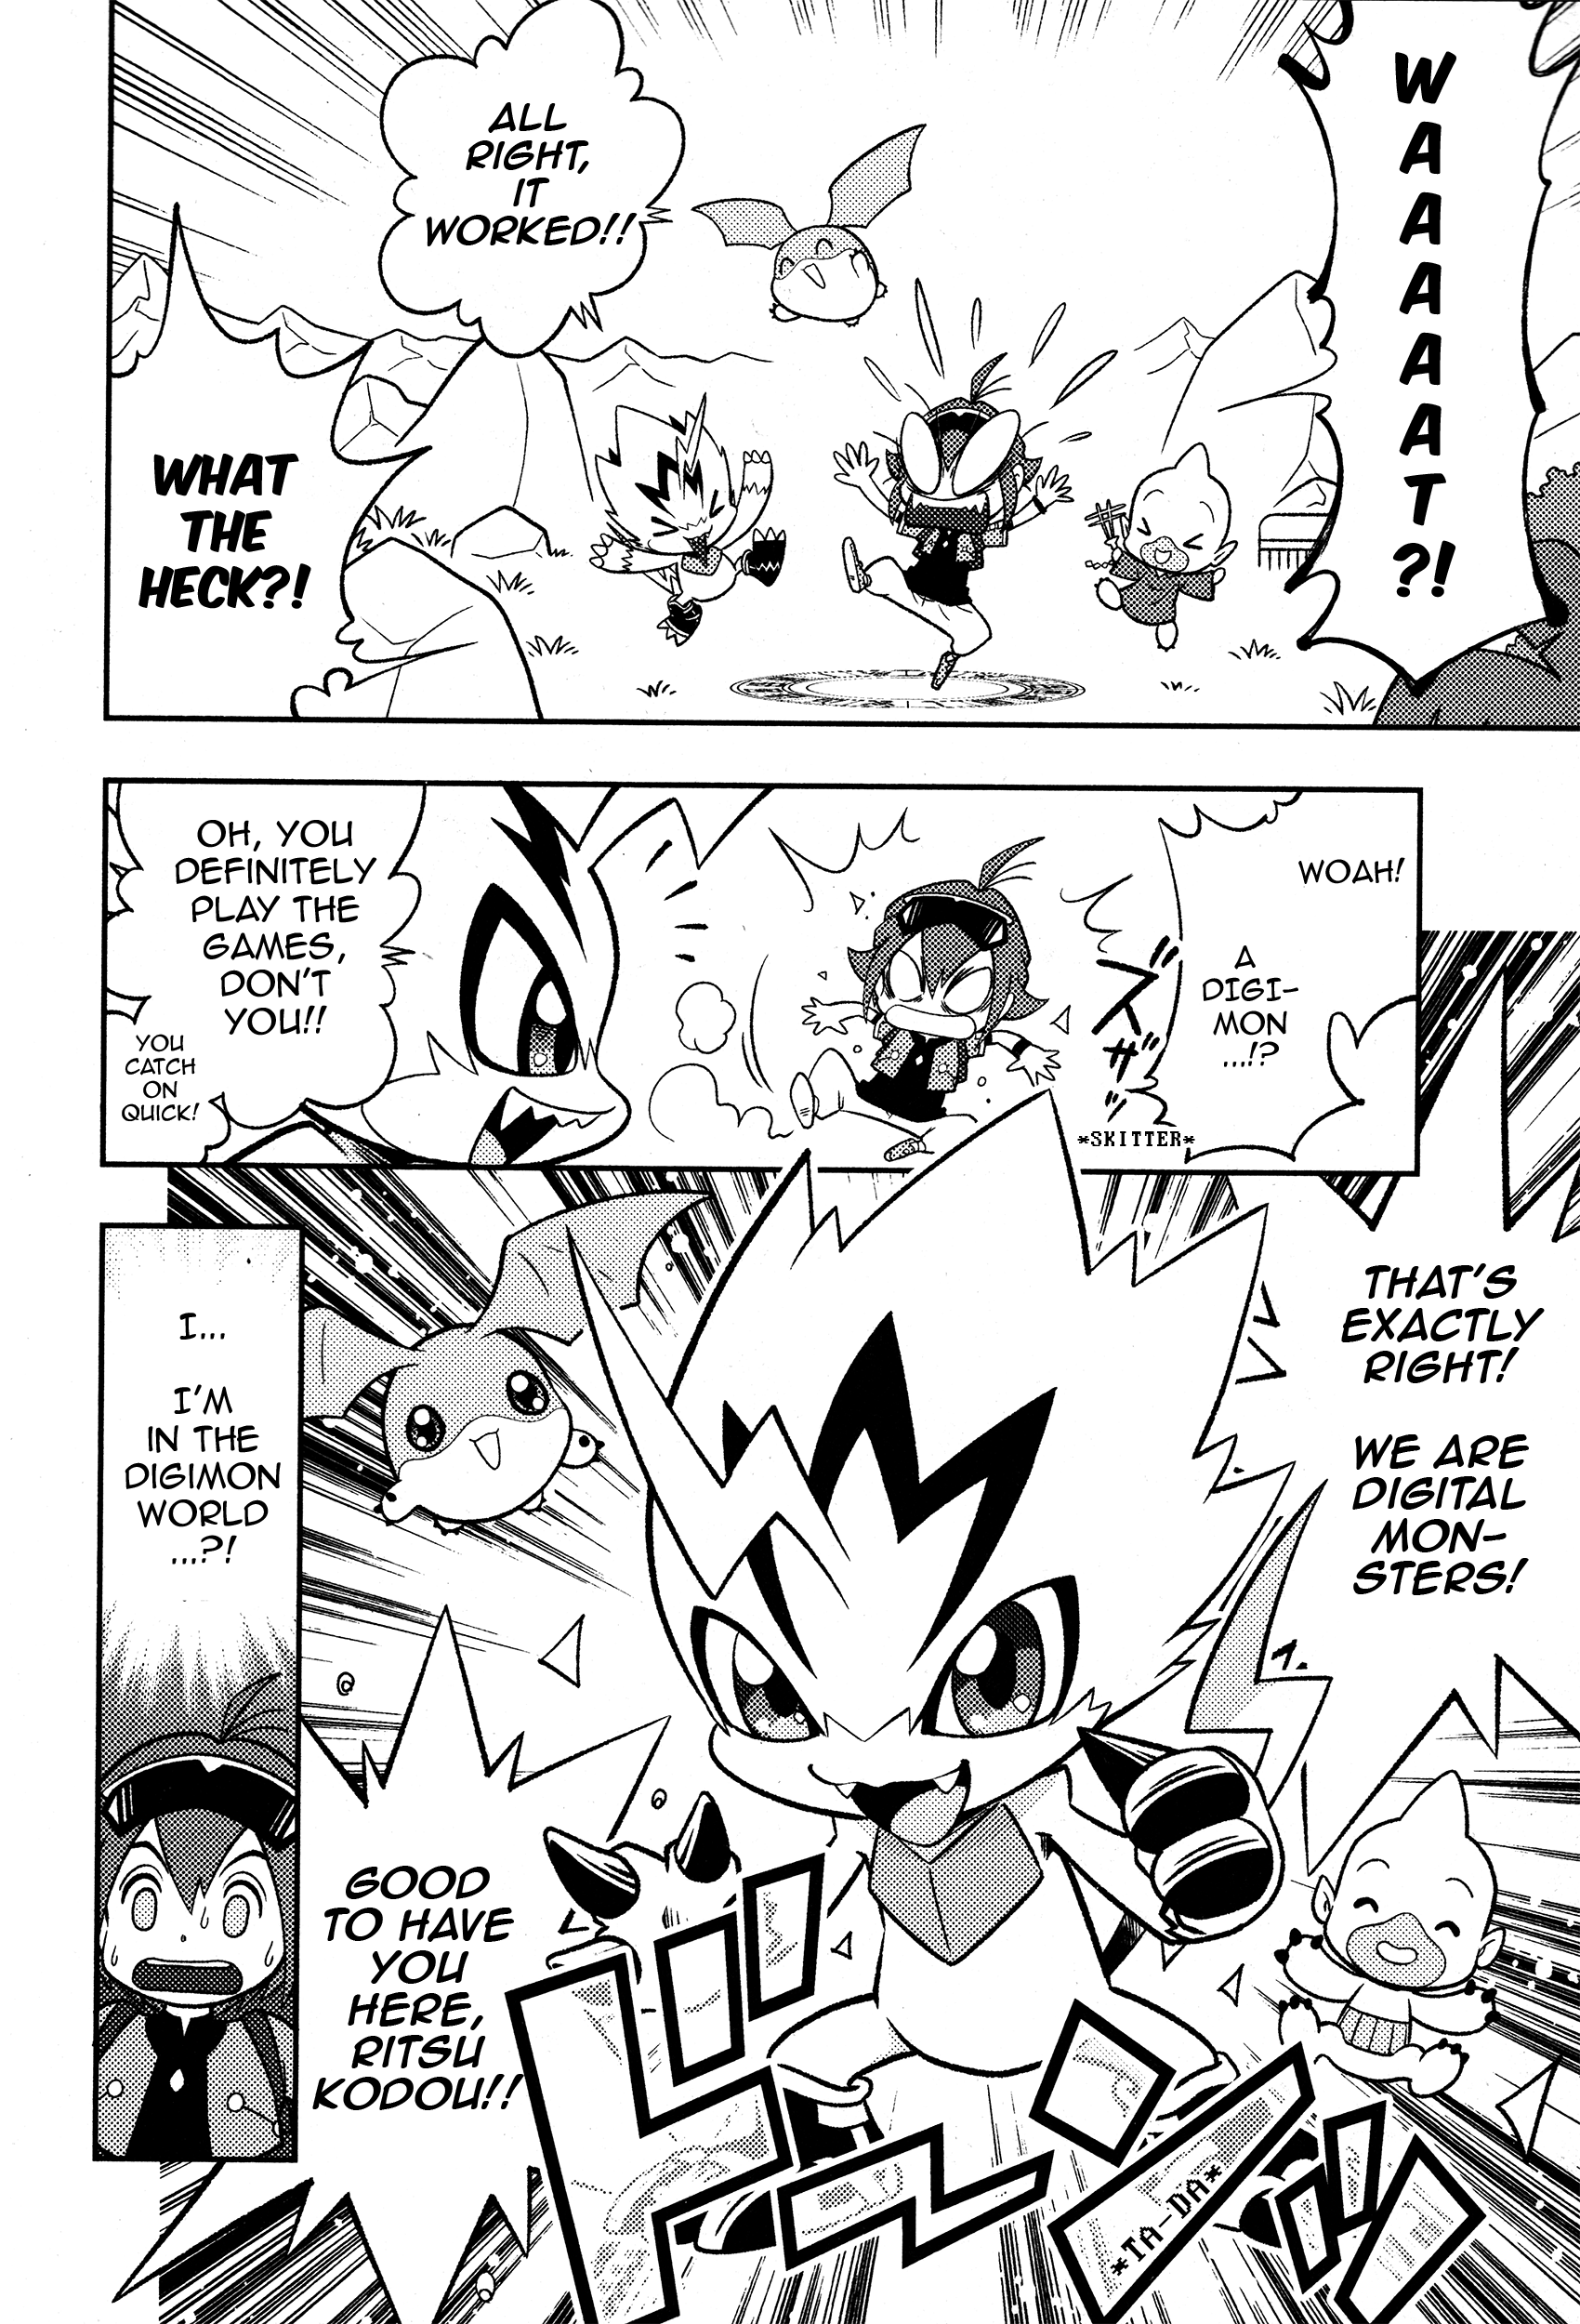 Digimon Dreamers - Page 3